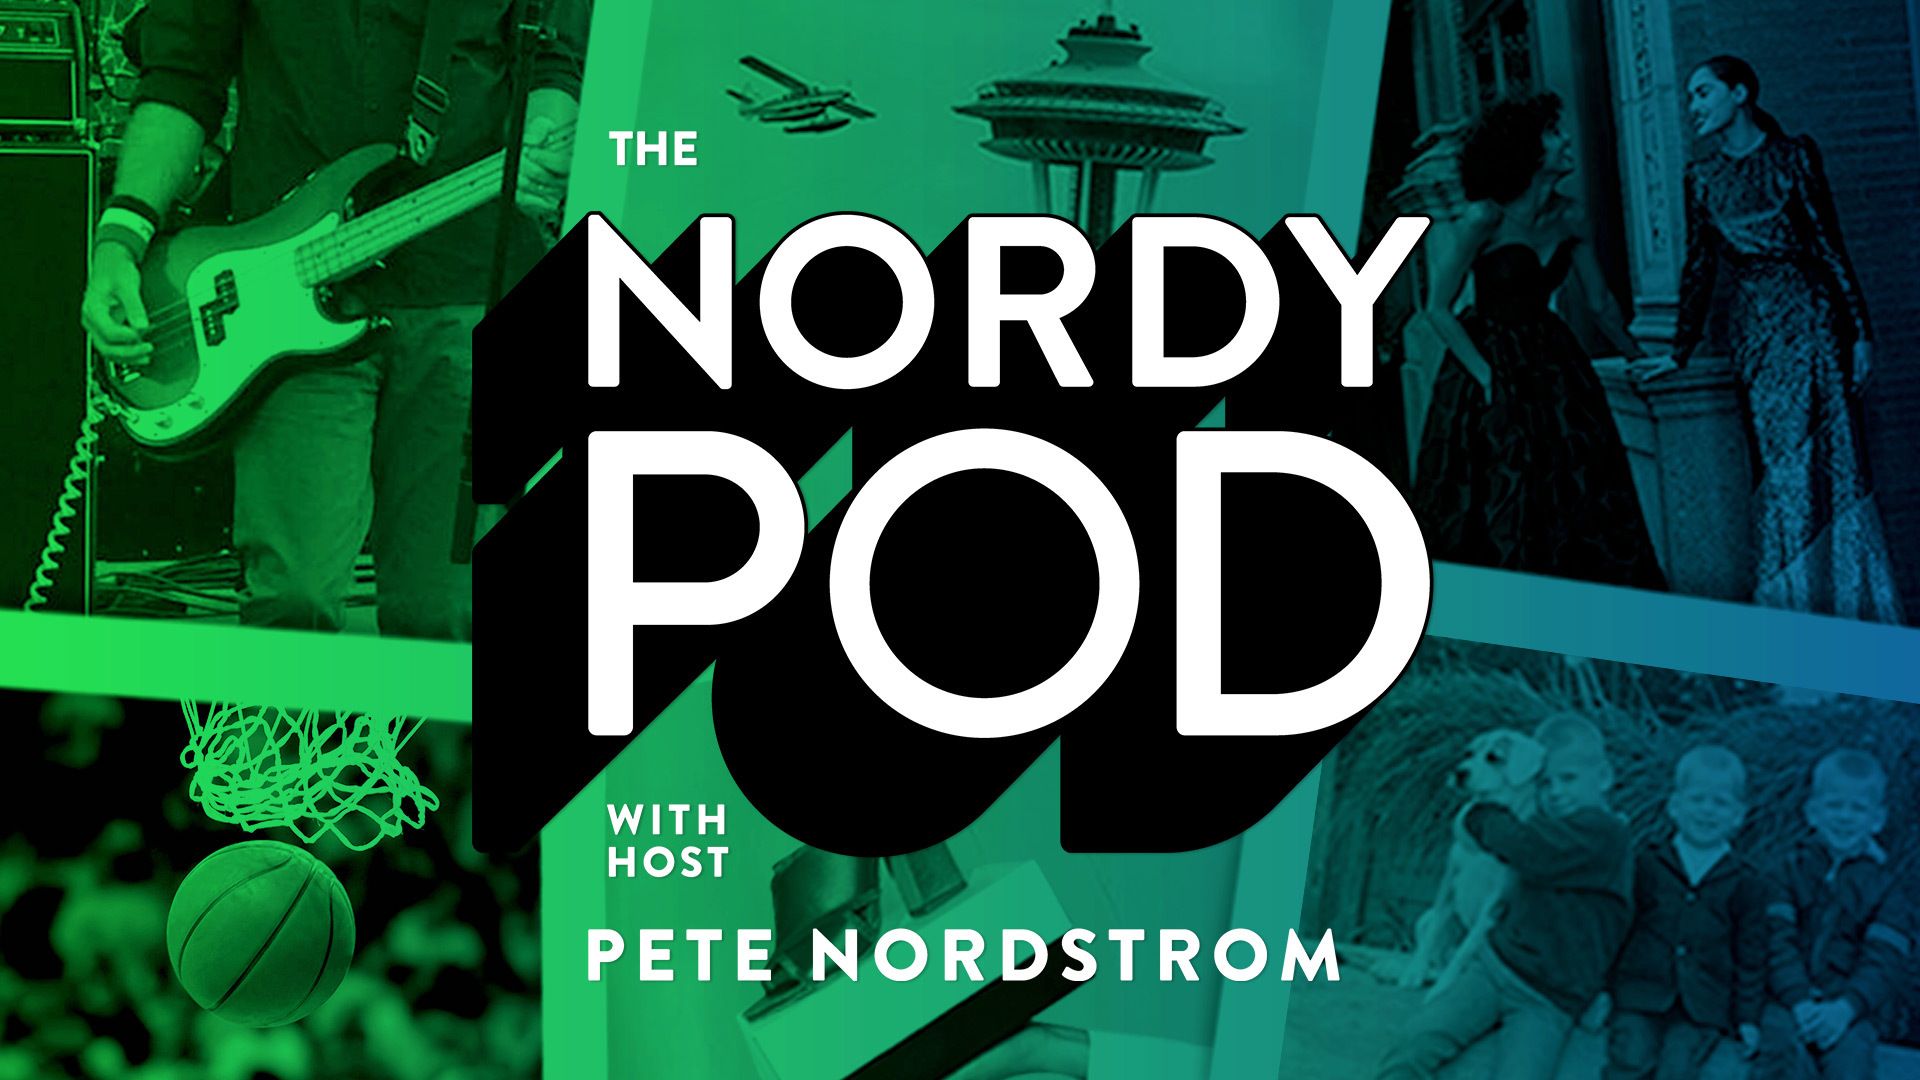 A green and black and turquoise image with white text that says "Nordy Pod with host Pete Nordstrom 